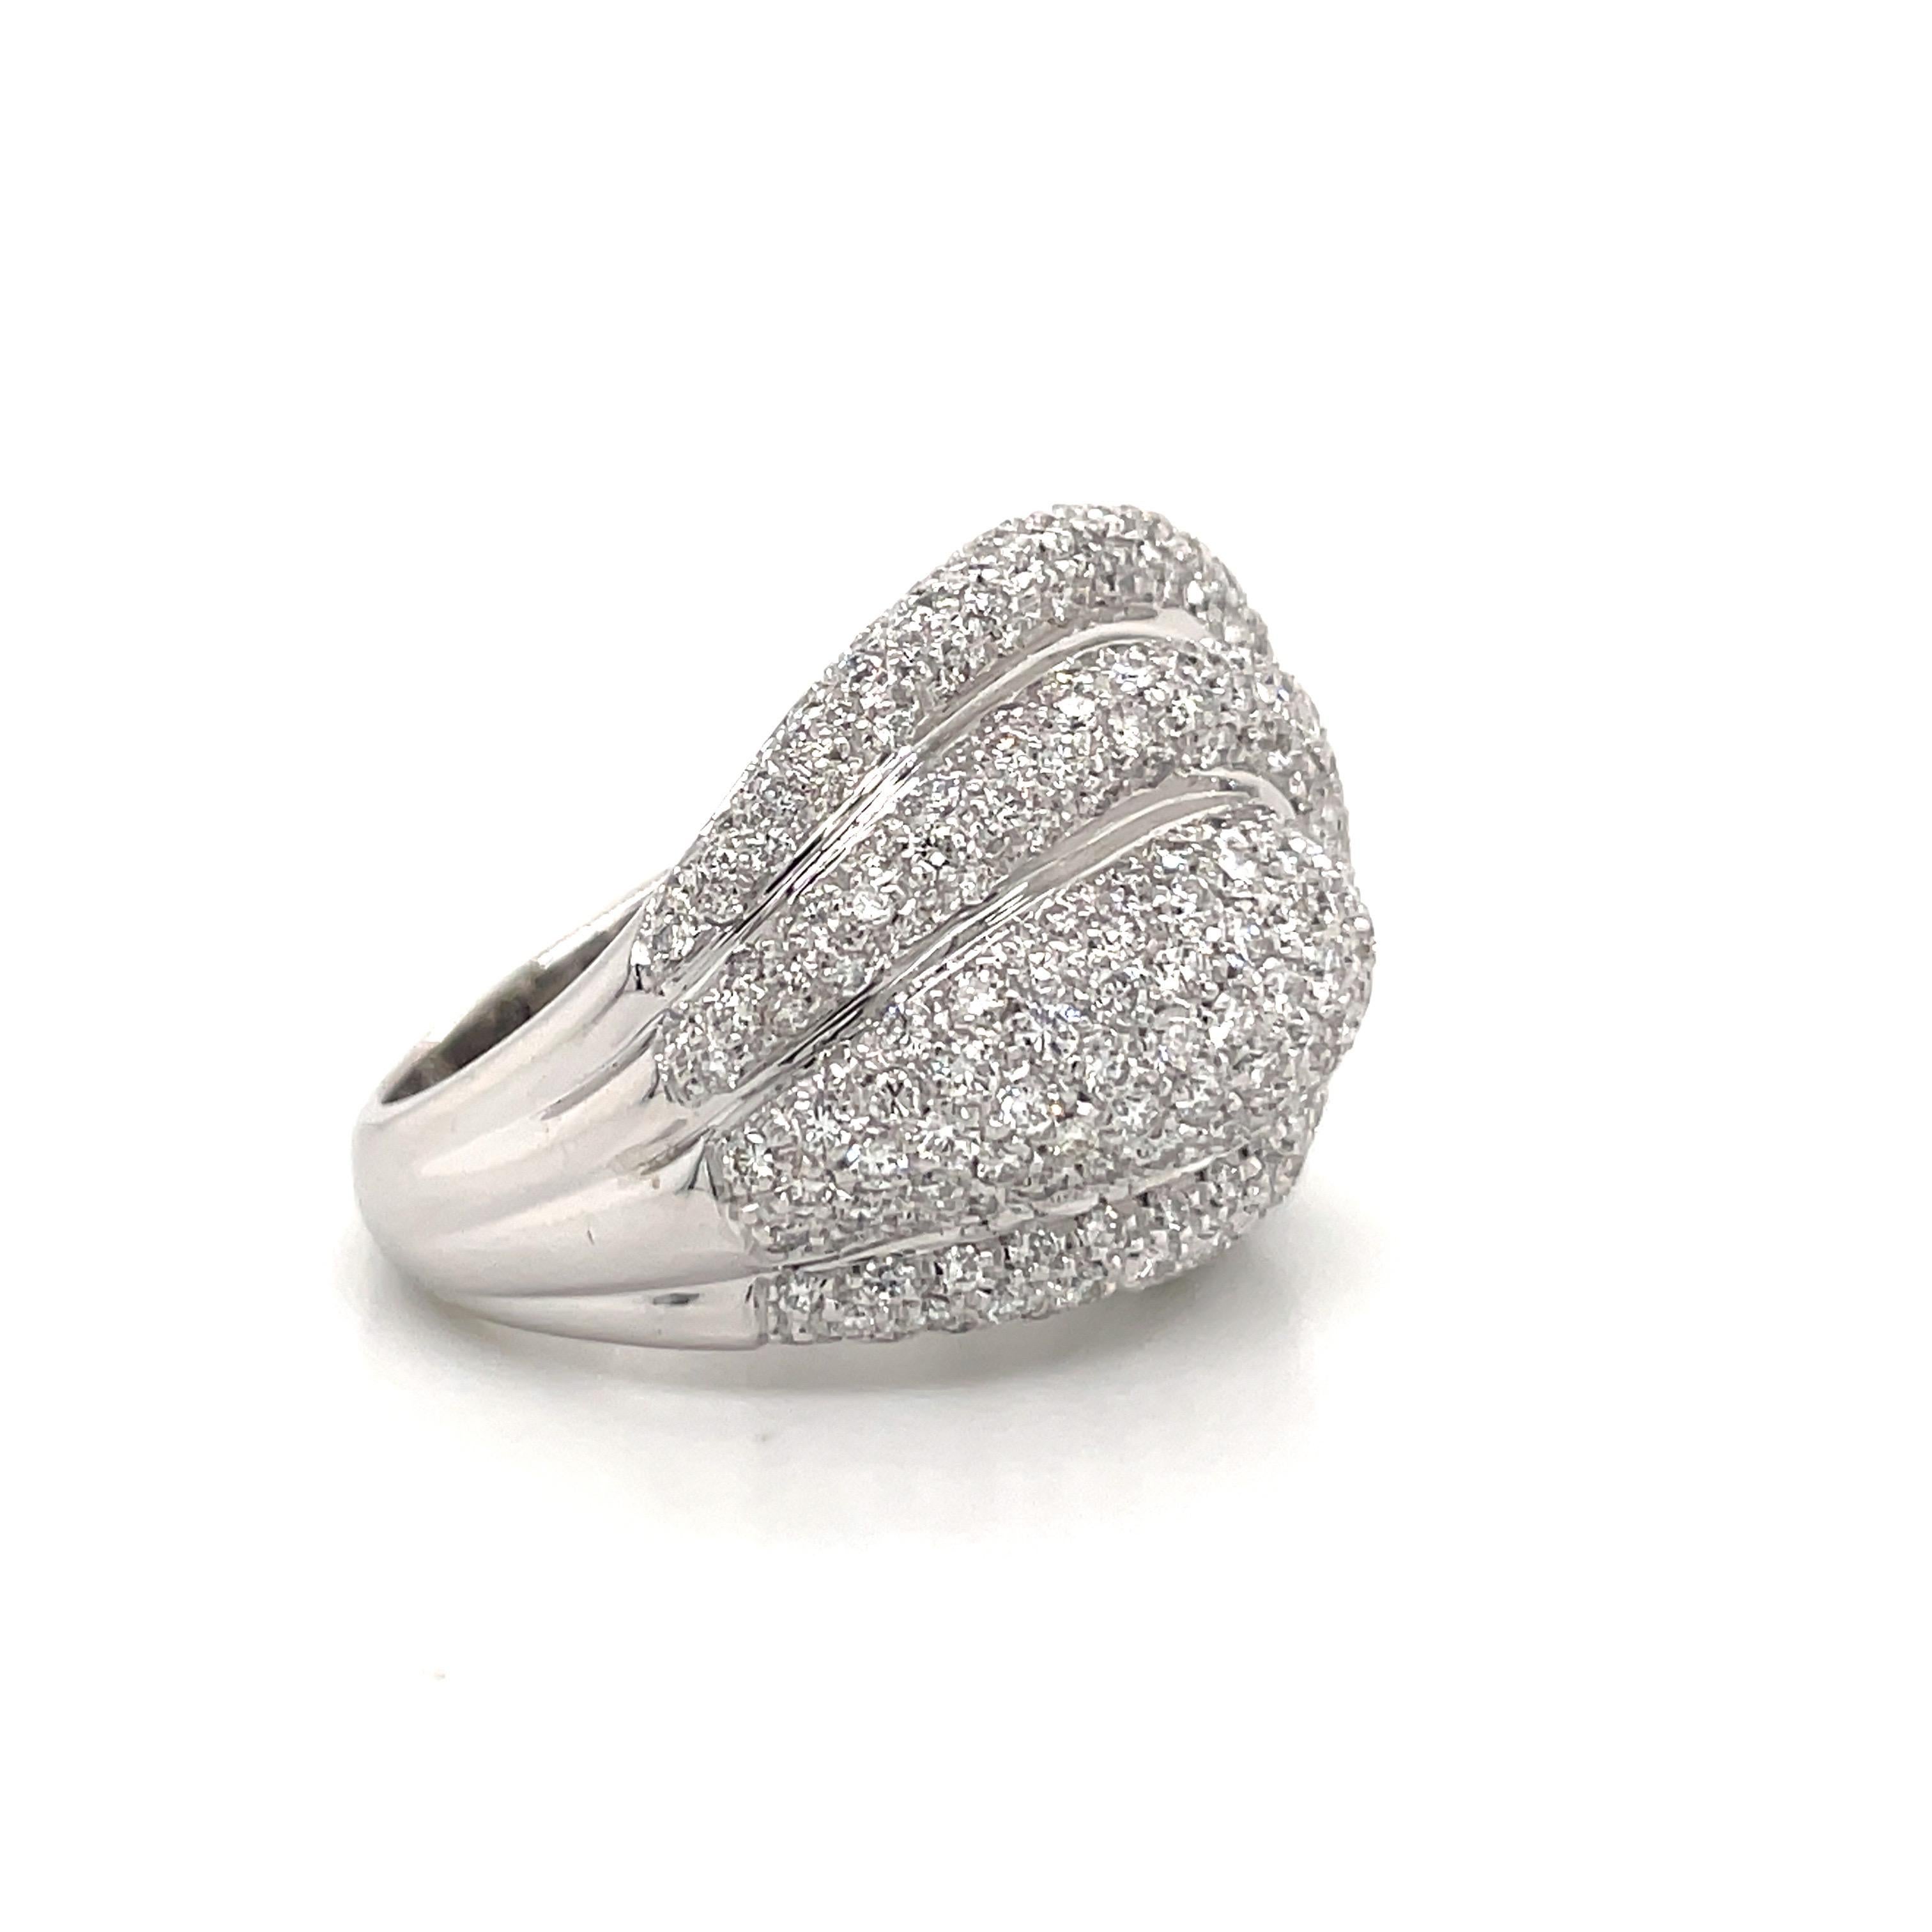 Diamond Dome Cocktail Ring 4 Carat 18 Karat White Gold In New Condition For Sale In New York, NY